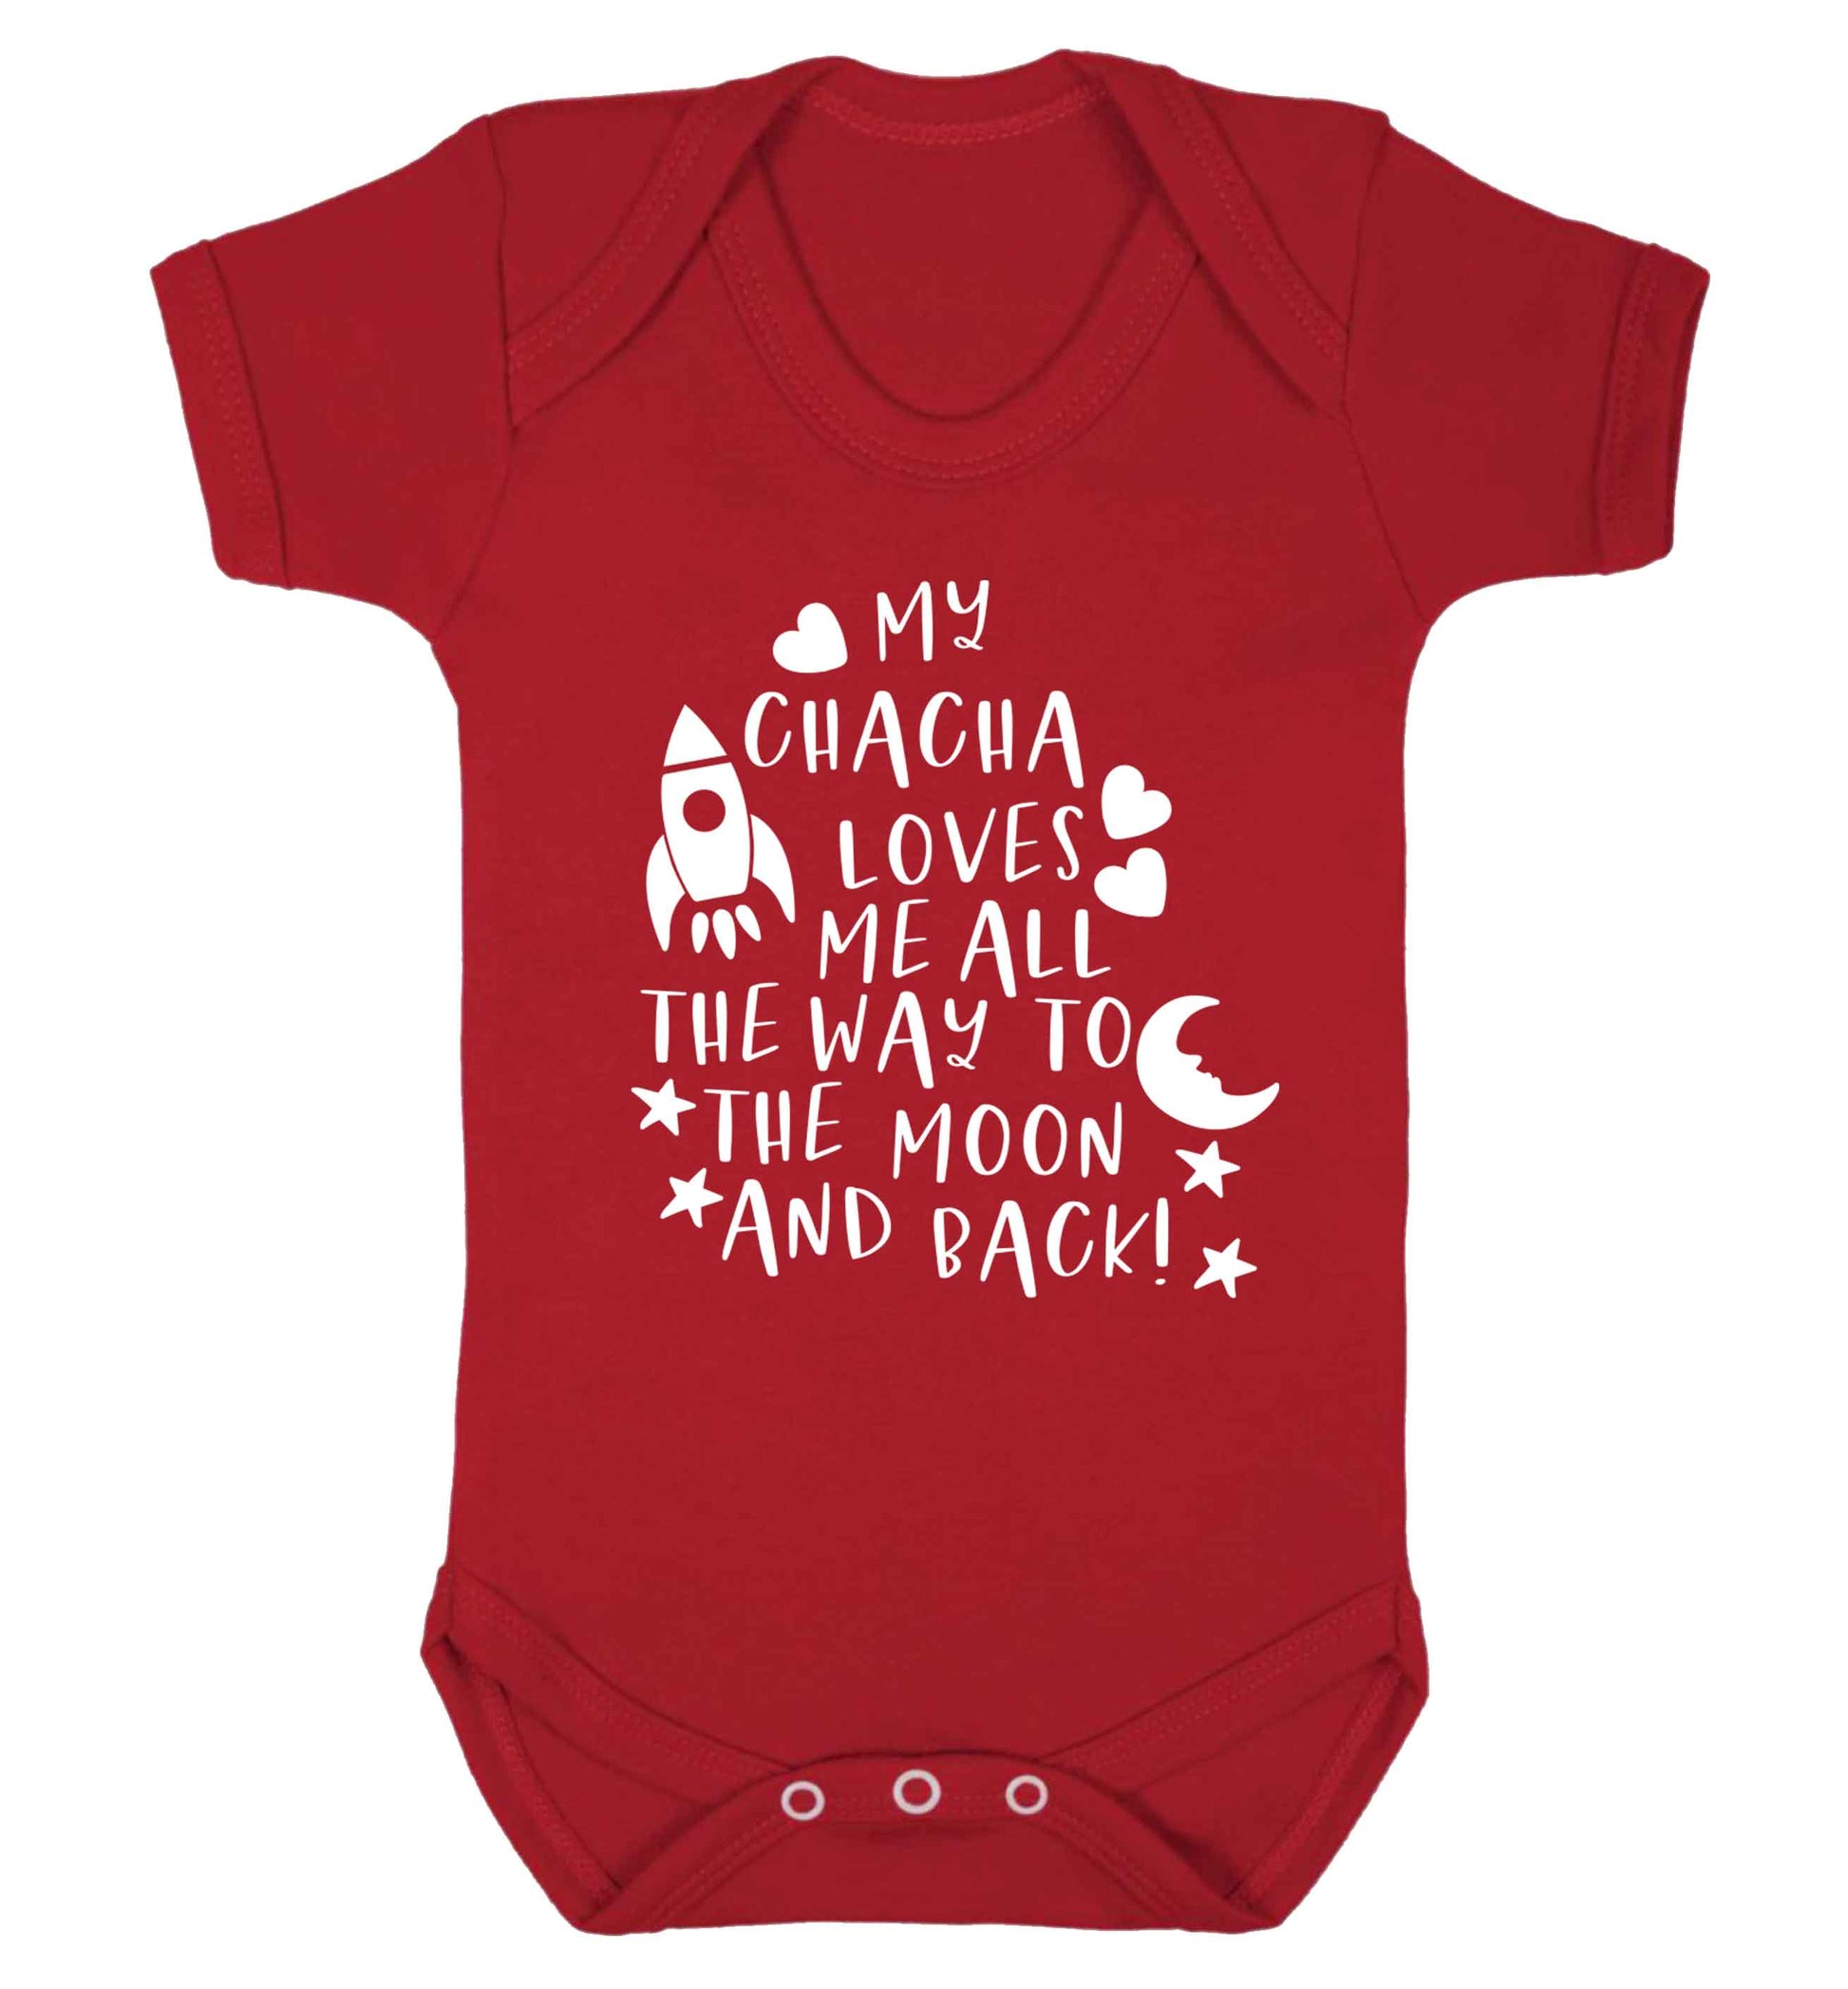 My chacha loves me all the way to the moon and back Baby Vest red 18-24 months